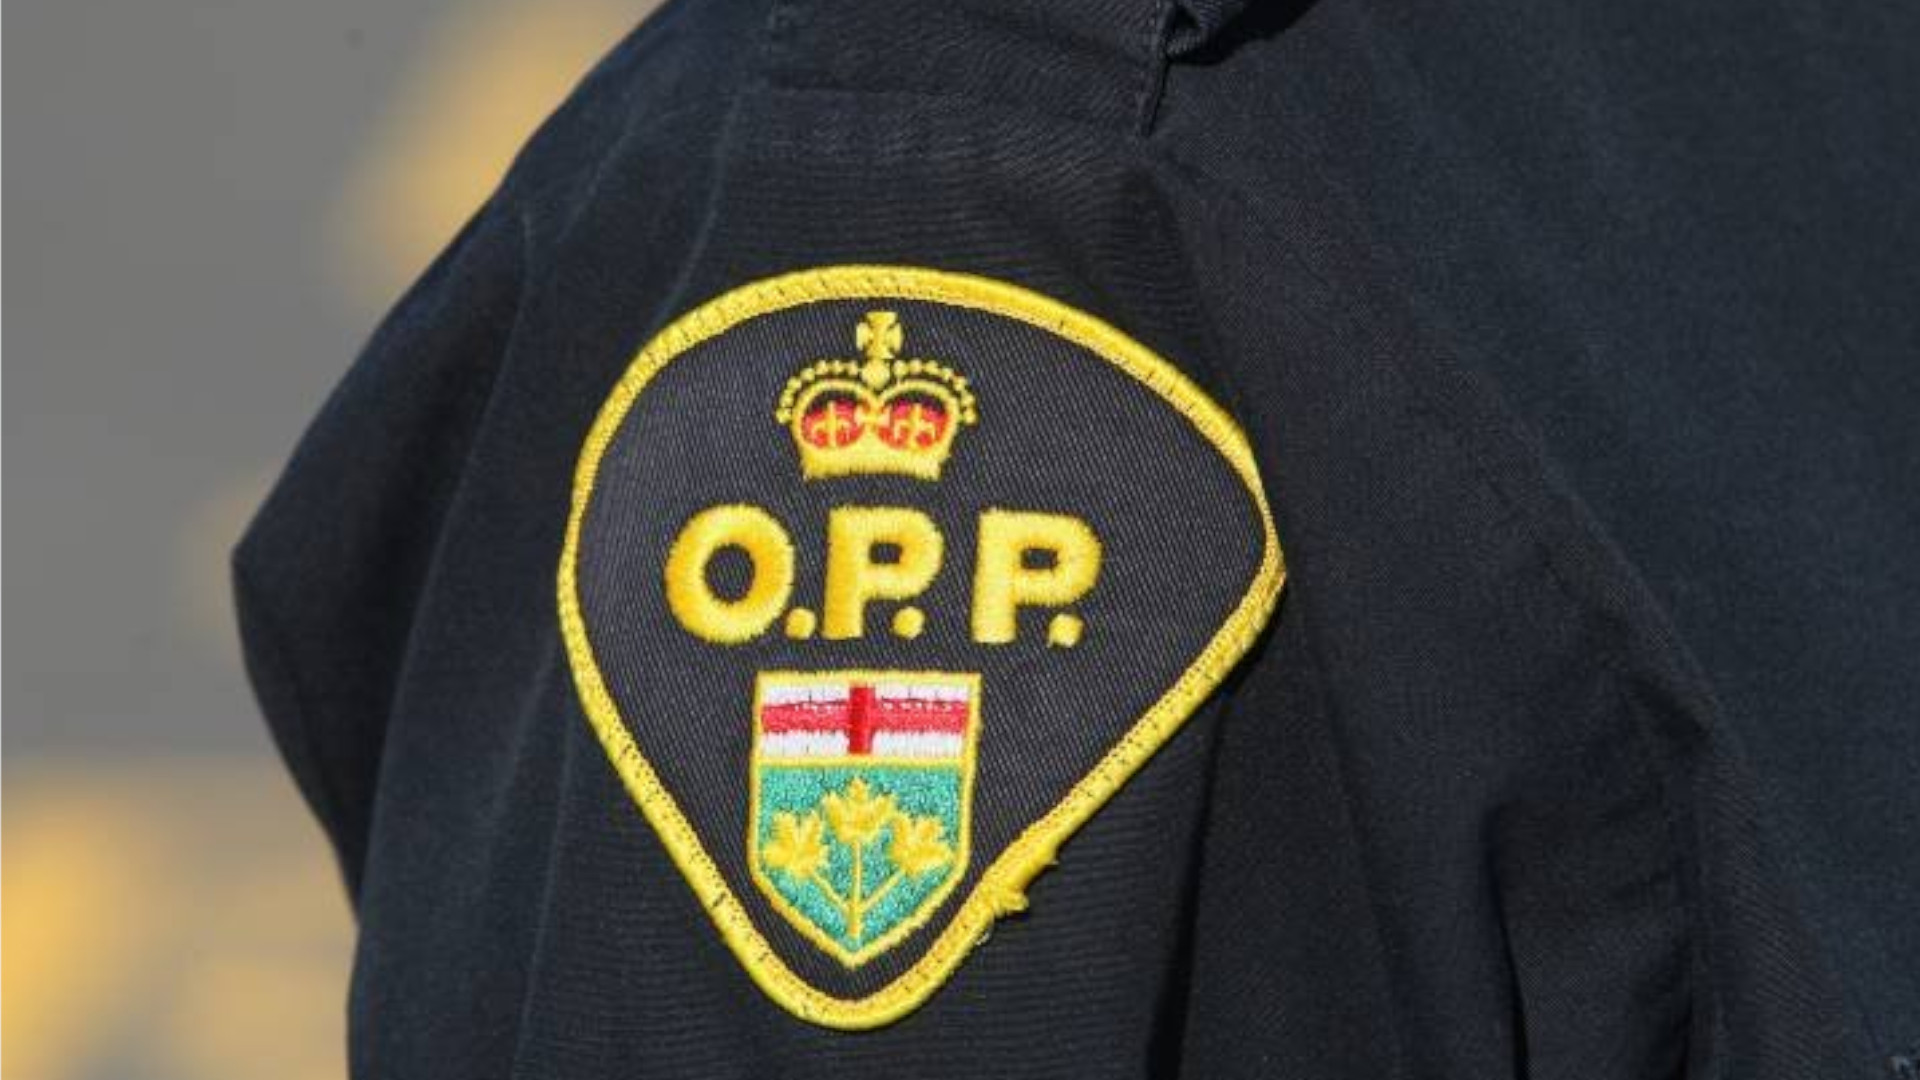 Motorcycle crash in small Ontario town claims life of 18-year-old man